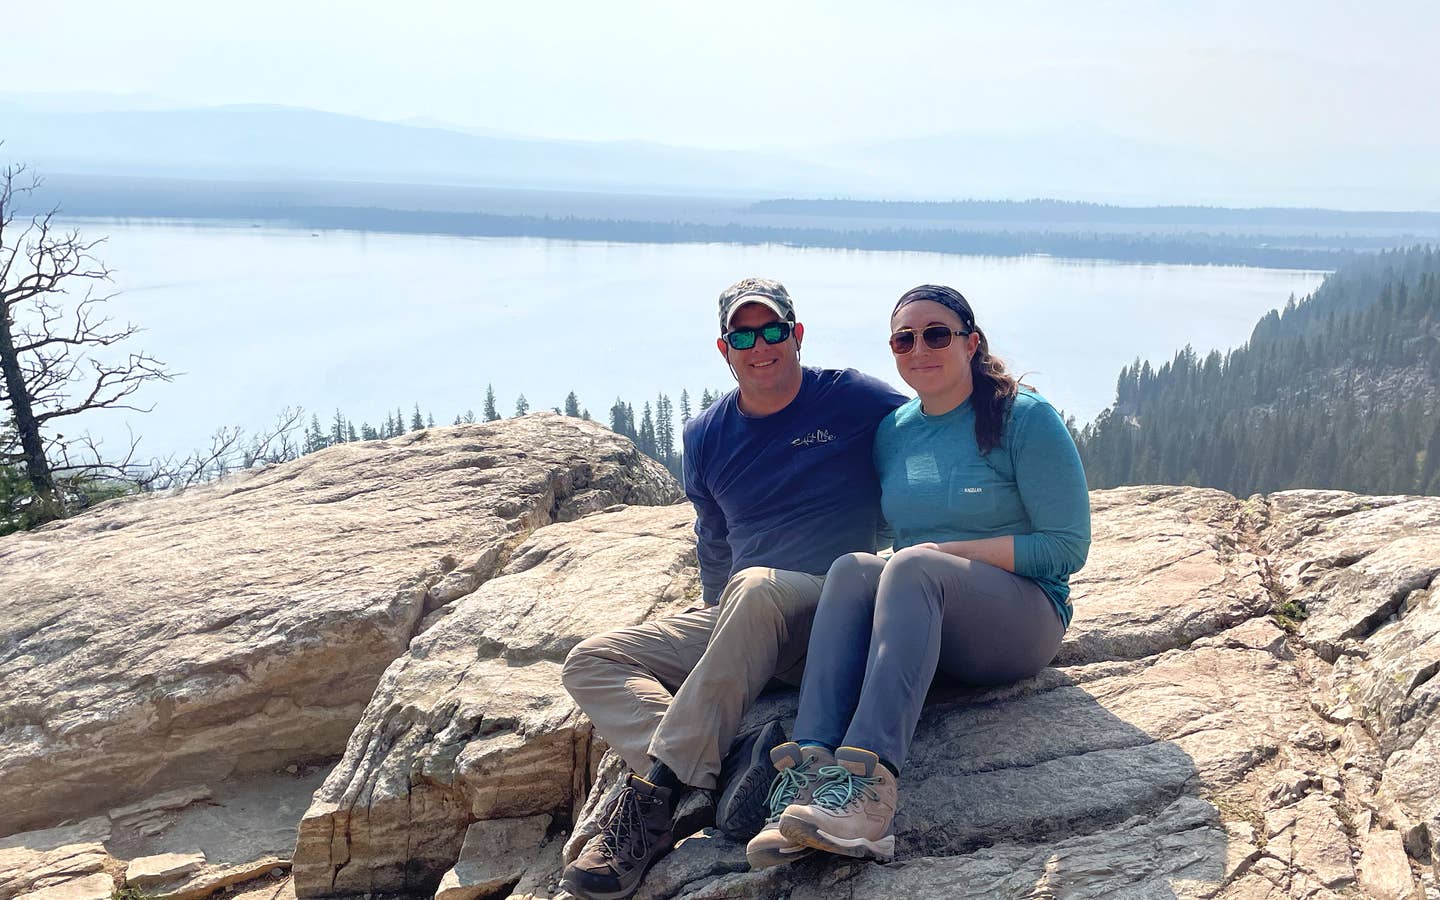 A woman and man in a blue, long sleeve shirt, grey pants, and brown hiking boots sits on a rock formation on a mountain overlooking a lake.